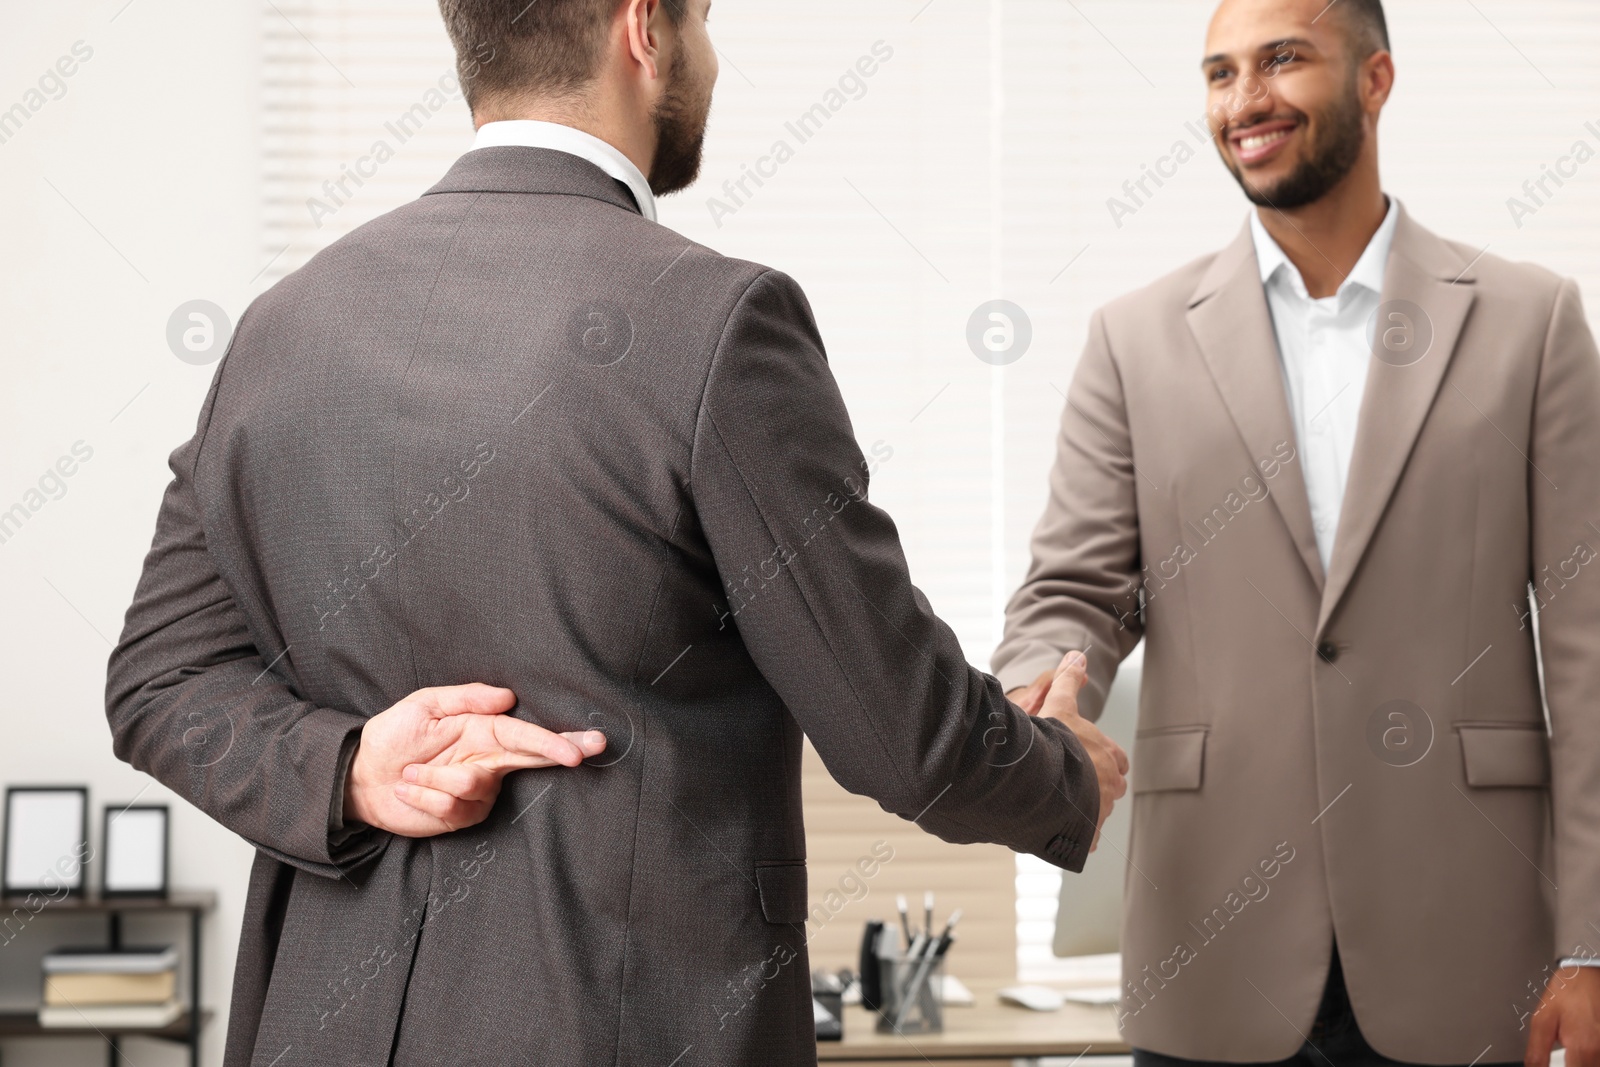 Photo of Employee crossing fingers behind his back while shaking hands with boss in office